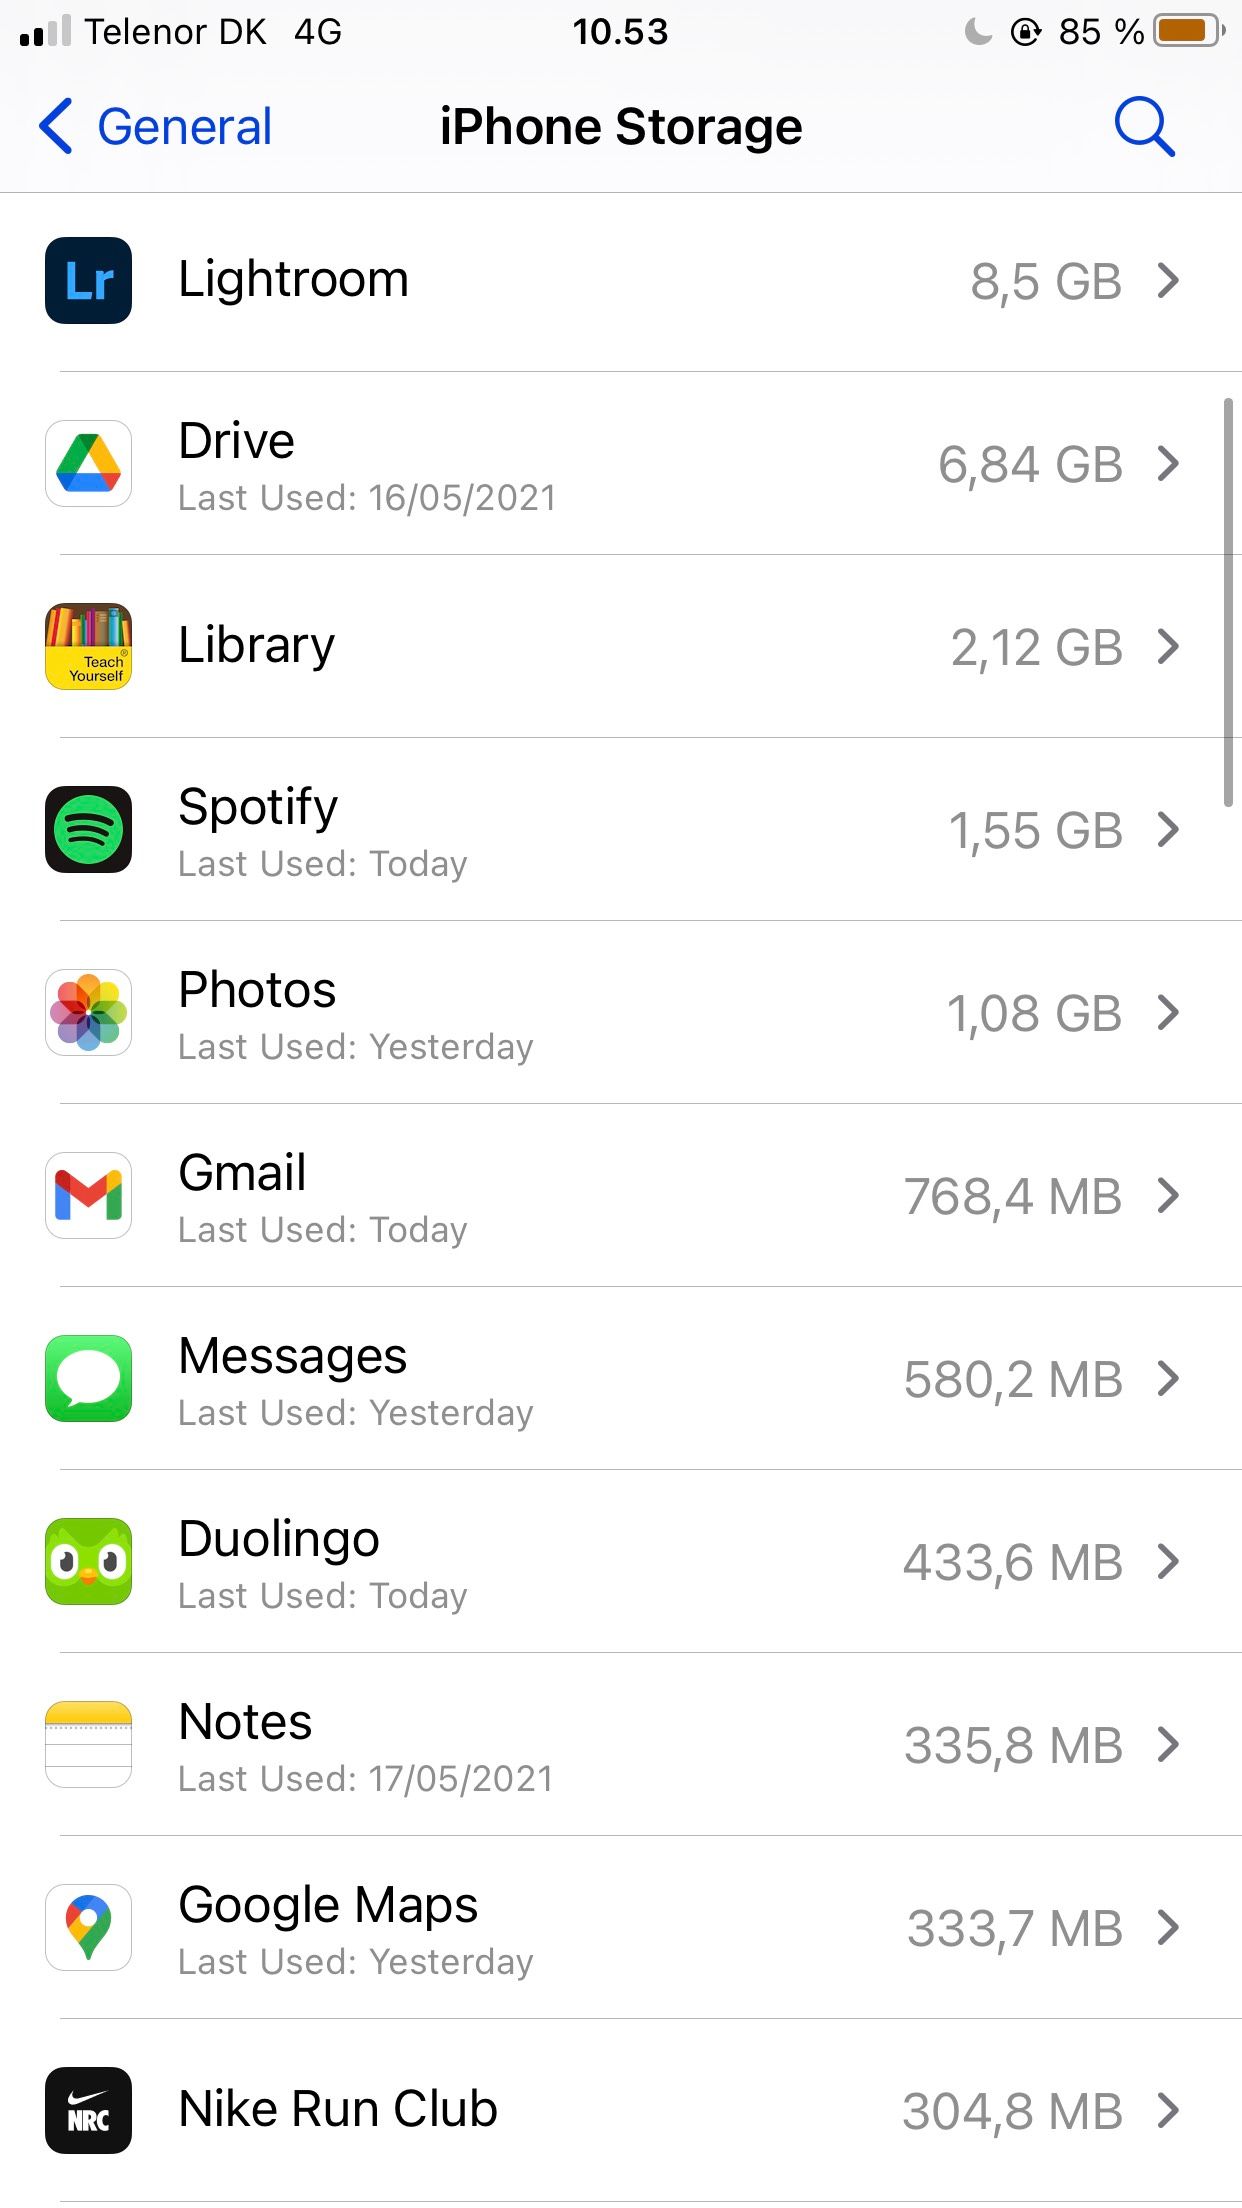 List of apps stored on iPhone